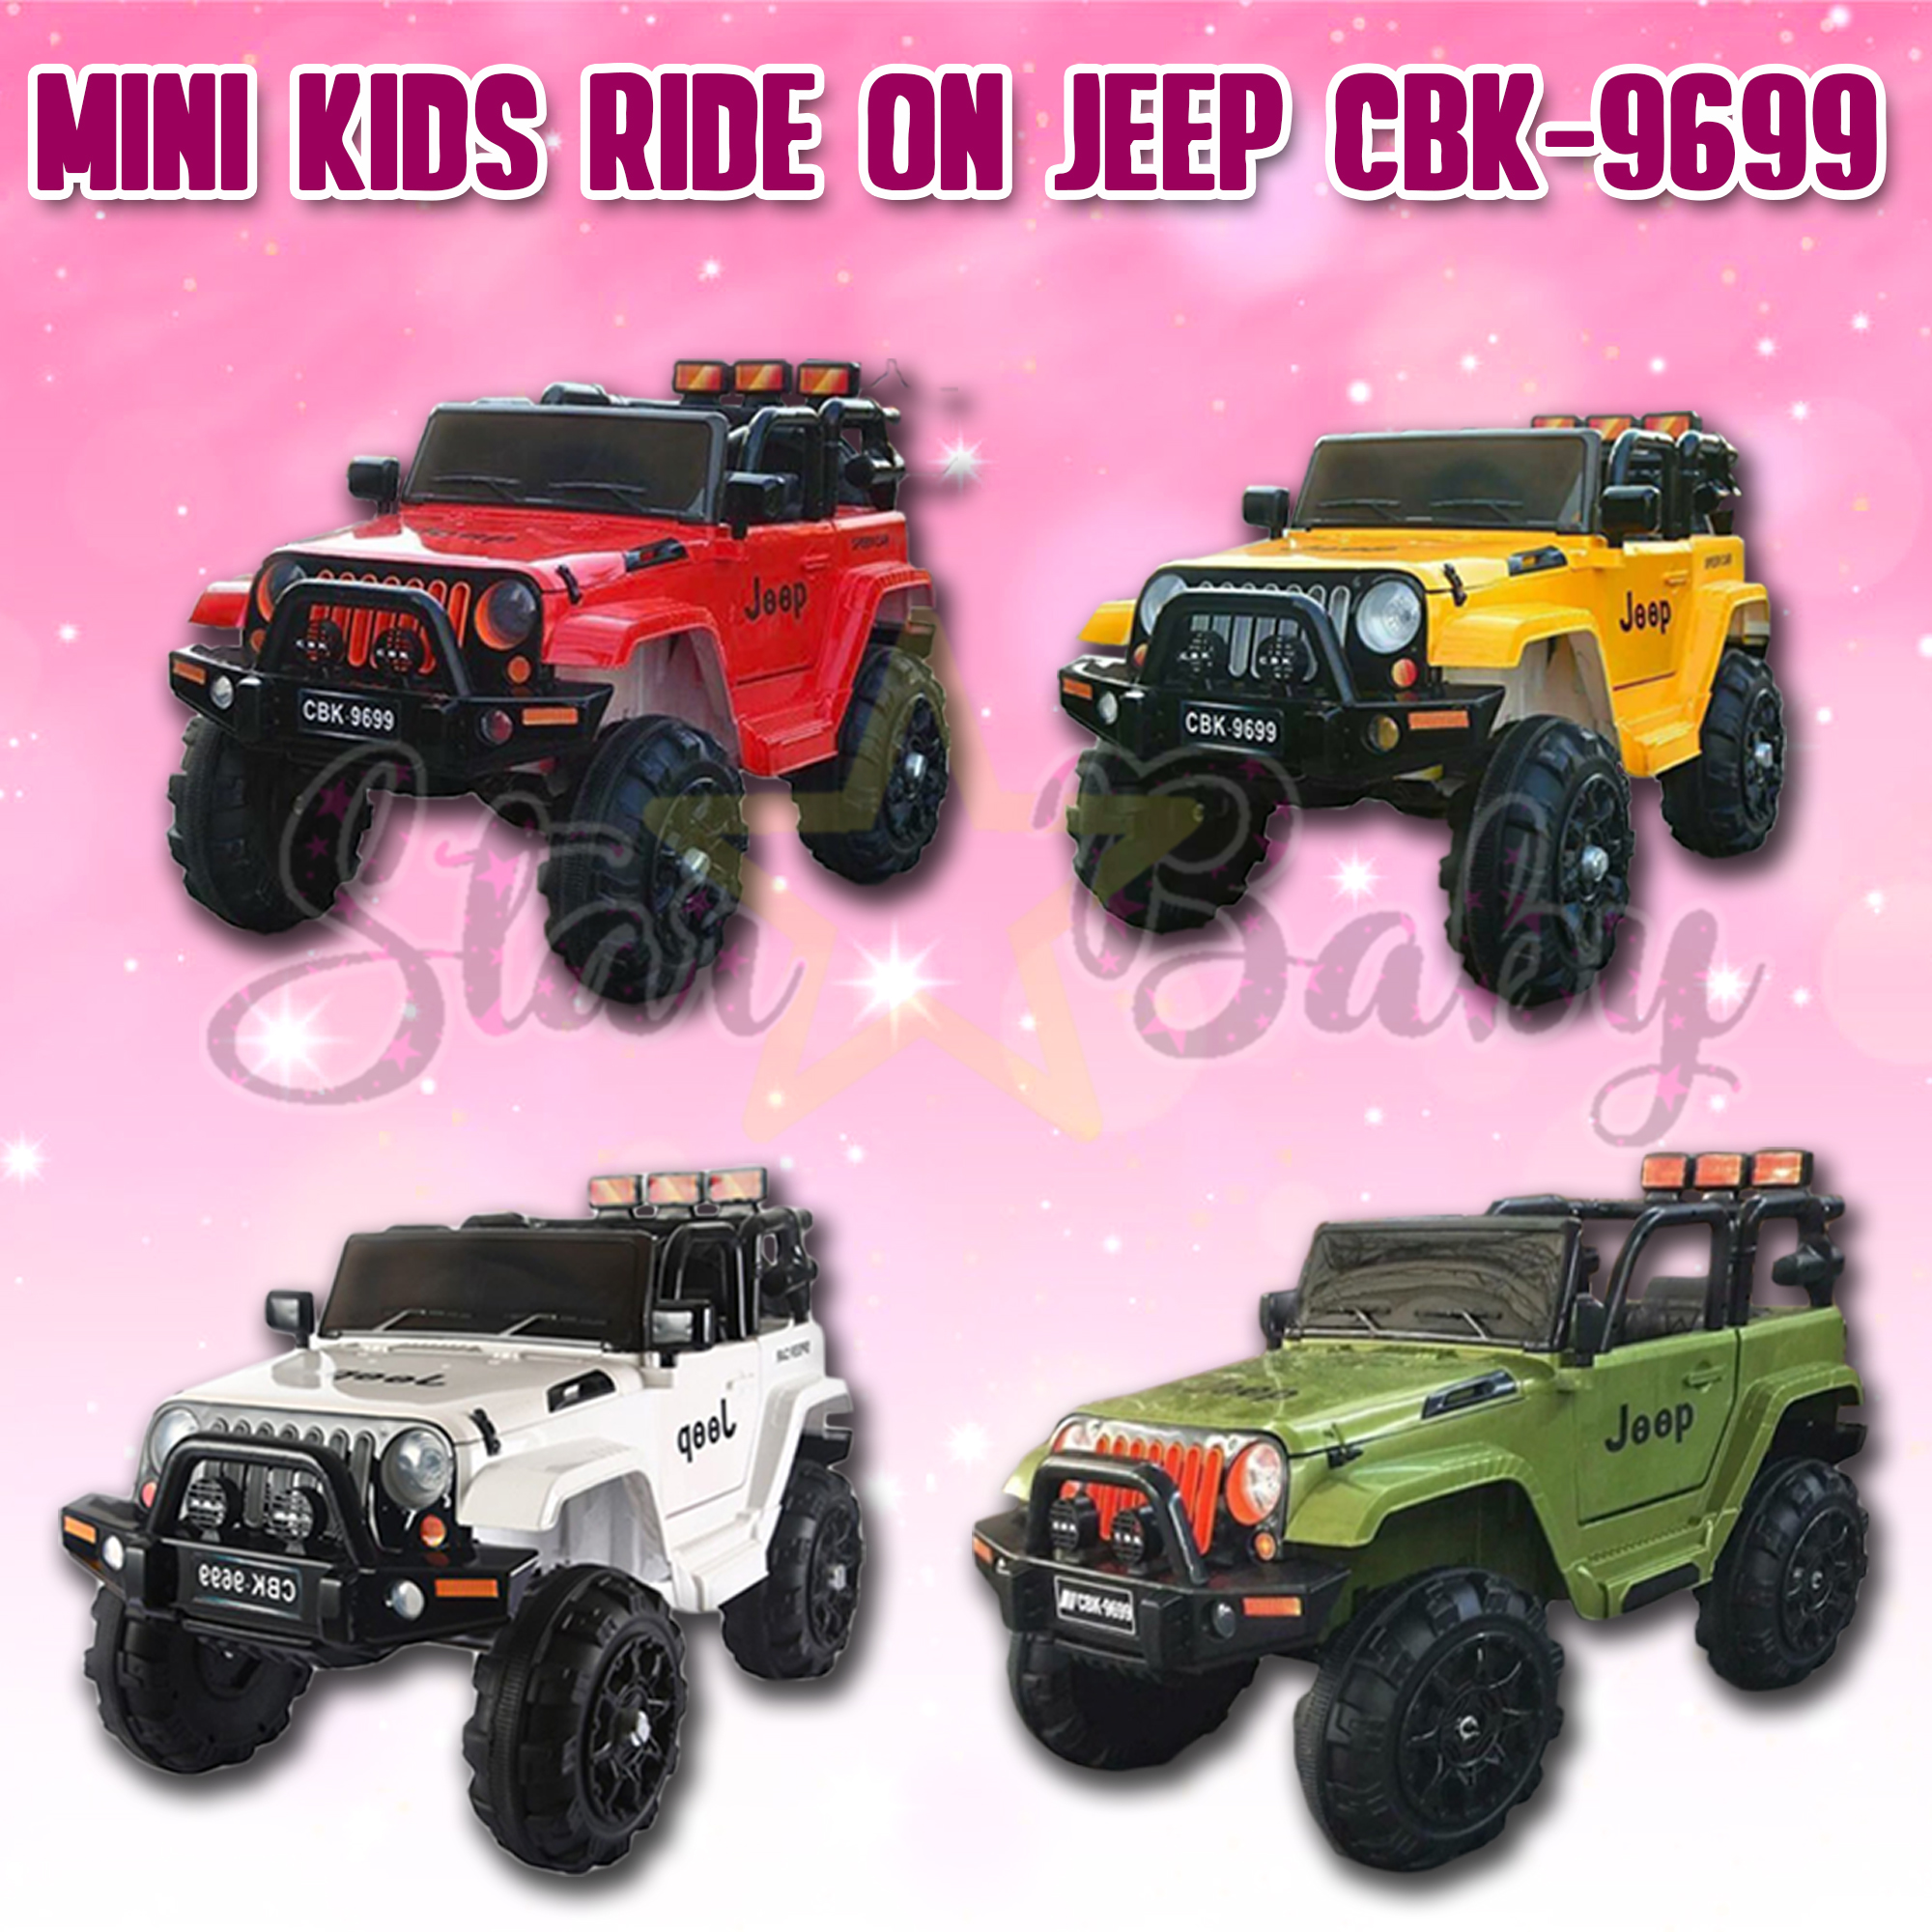 pink jeep power wheels with remote